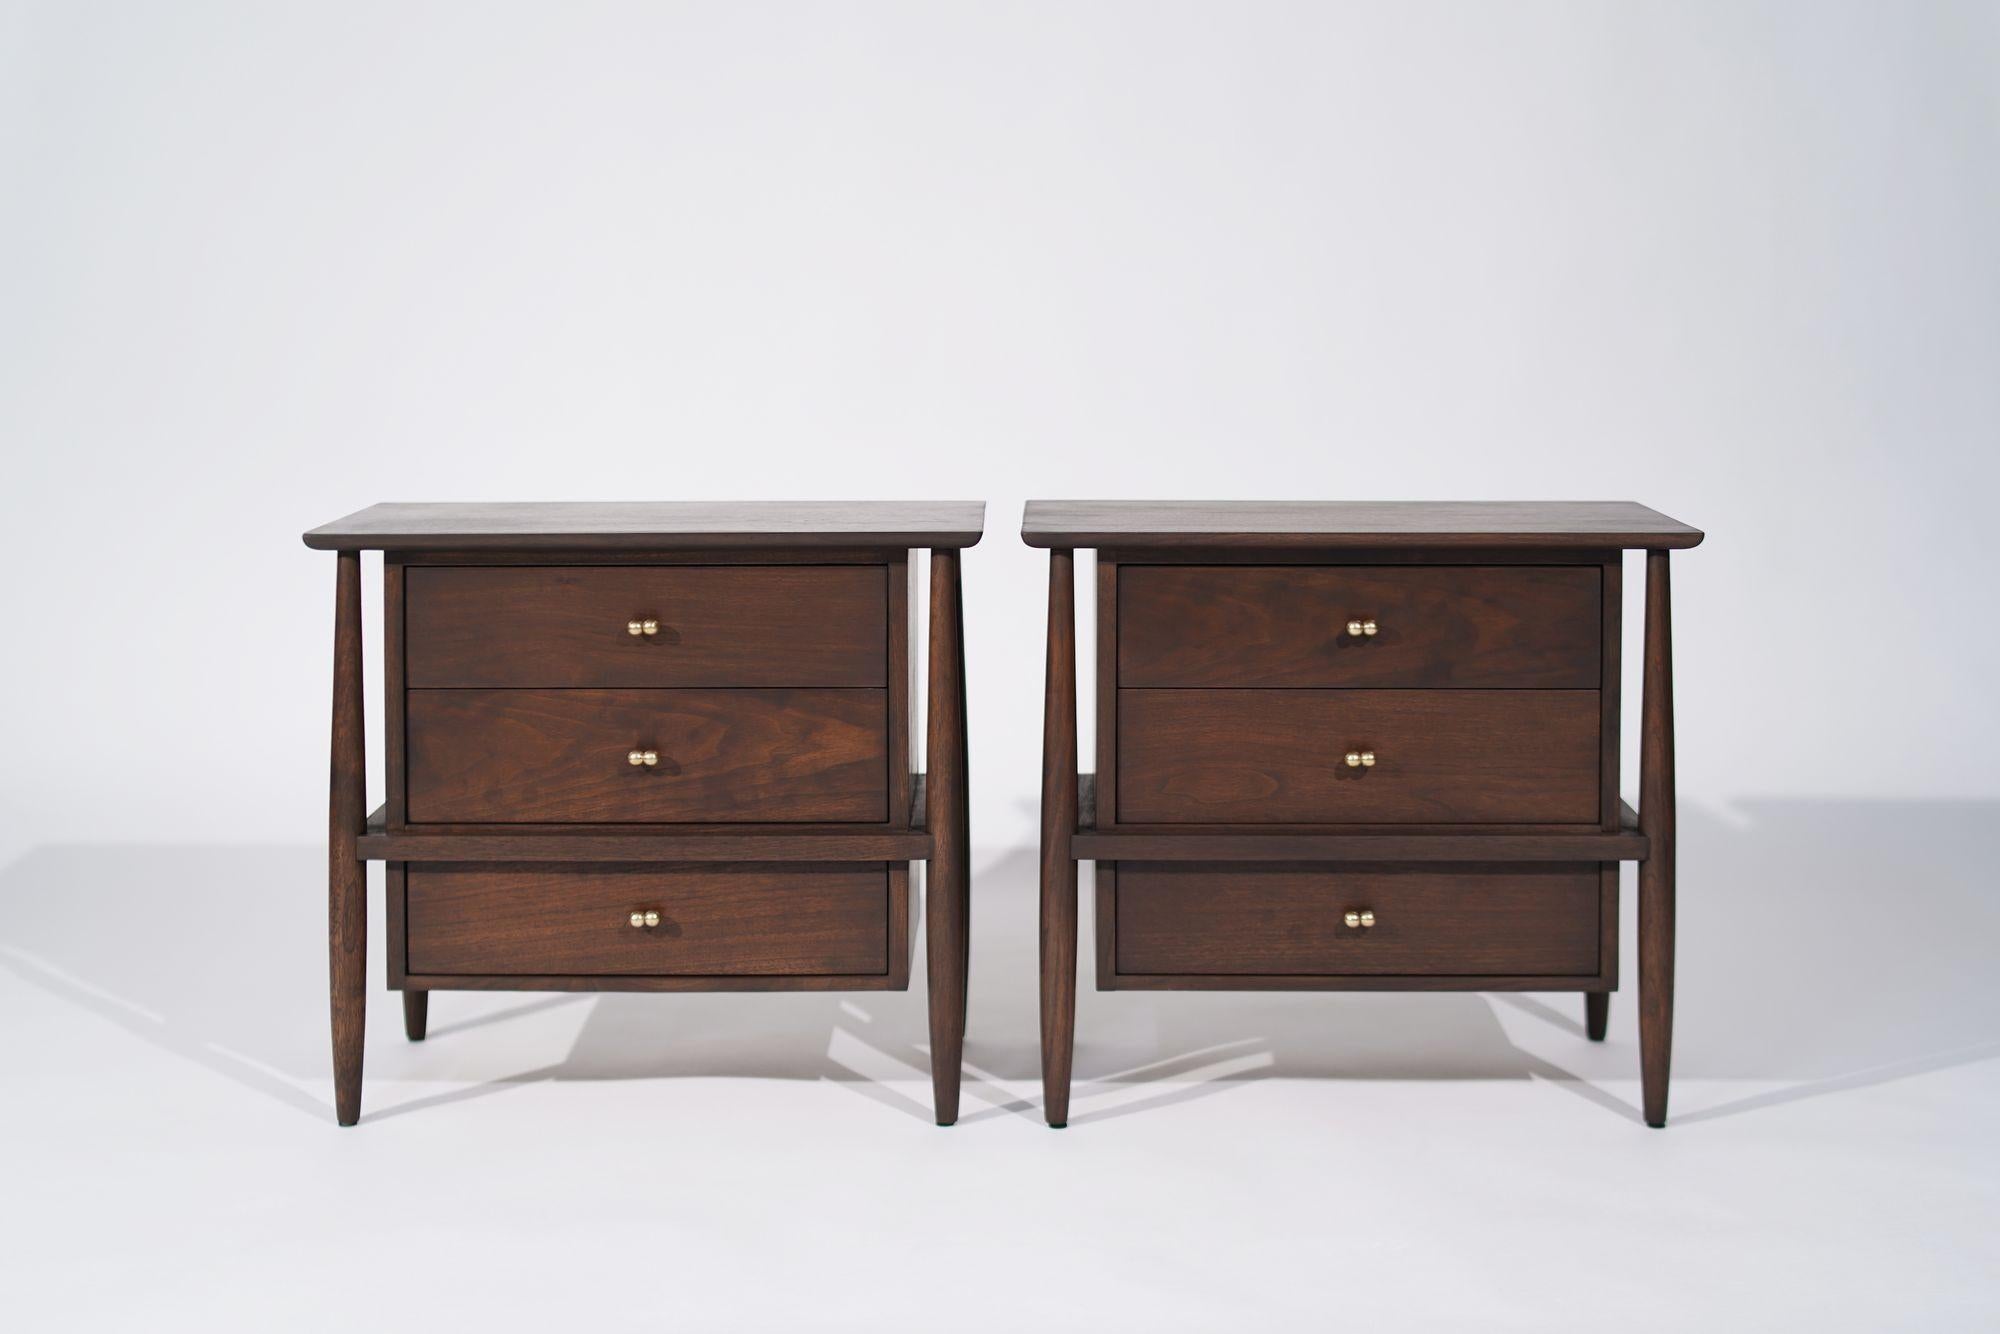 Pair of mid-century modern bedside tables or nightstands crafted in walnut by John Stuart, circa 1950-1950. These stunning pieces showcase an elegant exposed framework, three spacious drawers, and luxurious brass hardware, blending timeless design